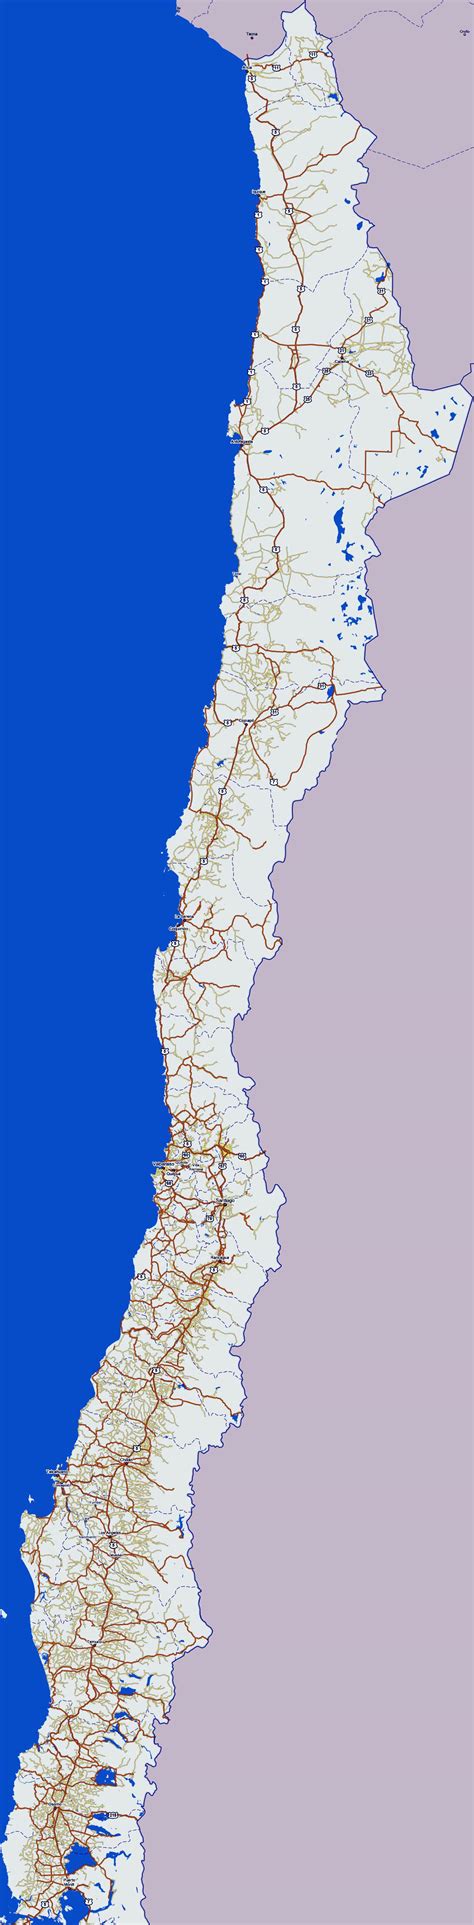 Chile Maps | Printable Maps of Chile for Download